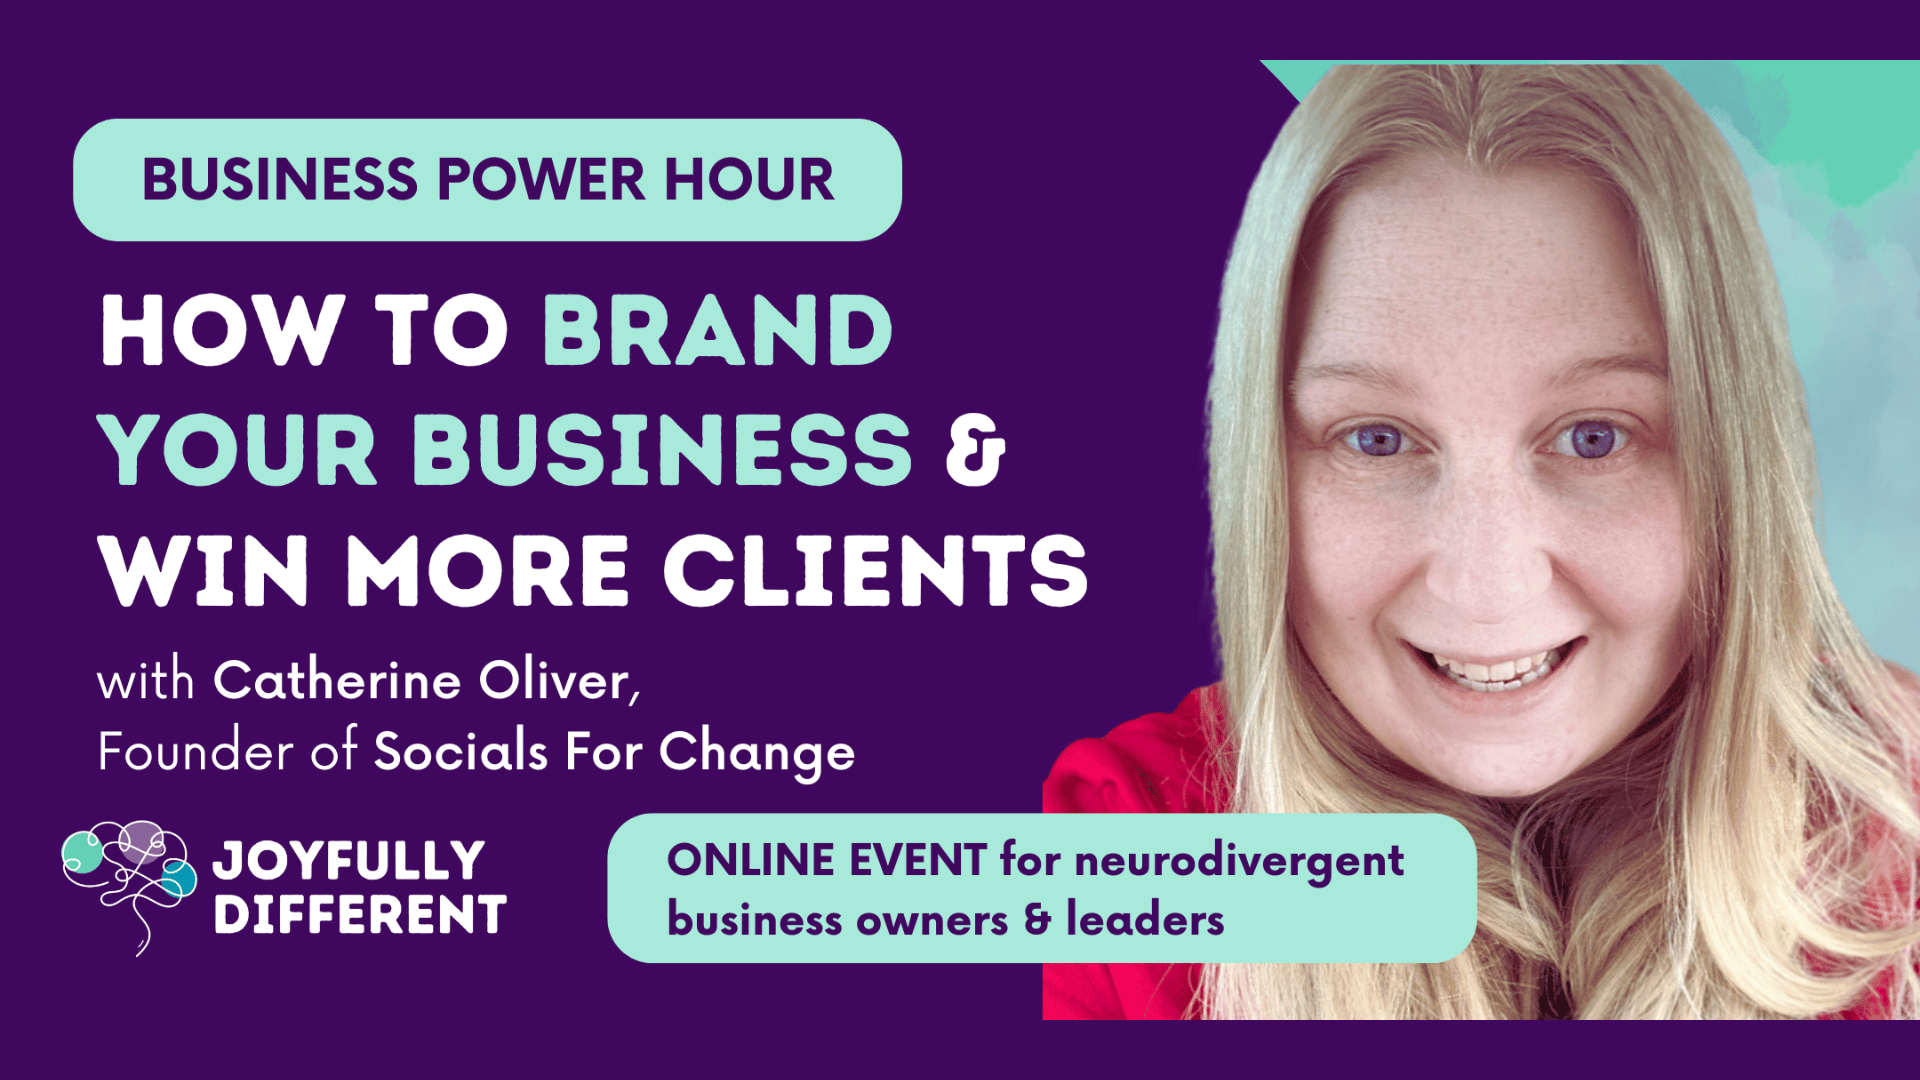 Power Hour: How to Brand Your Business & Win More Clients